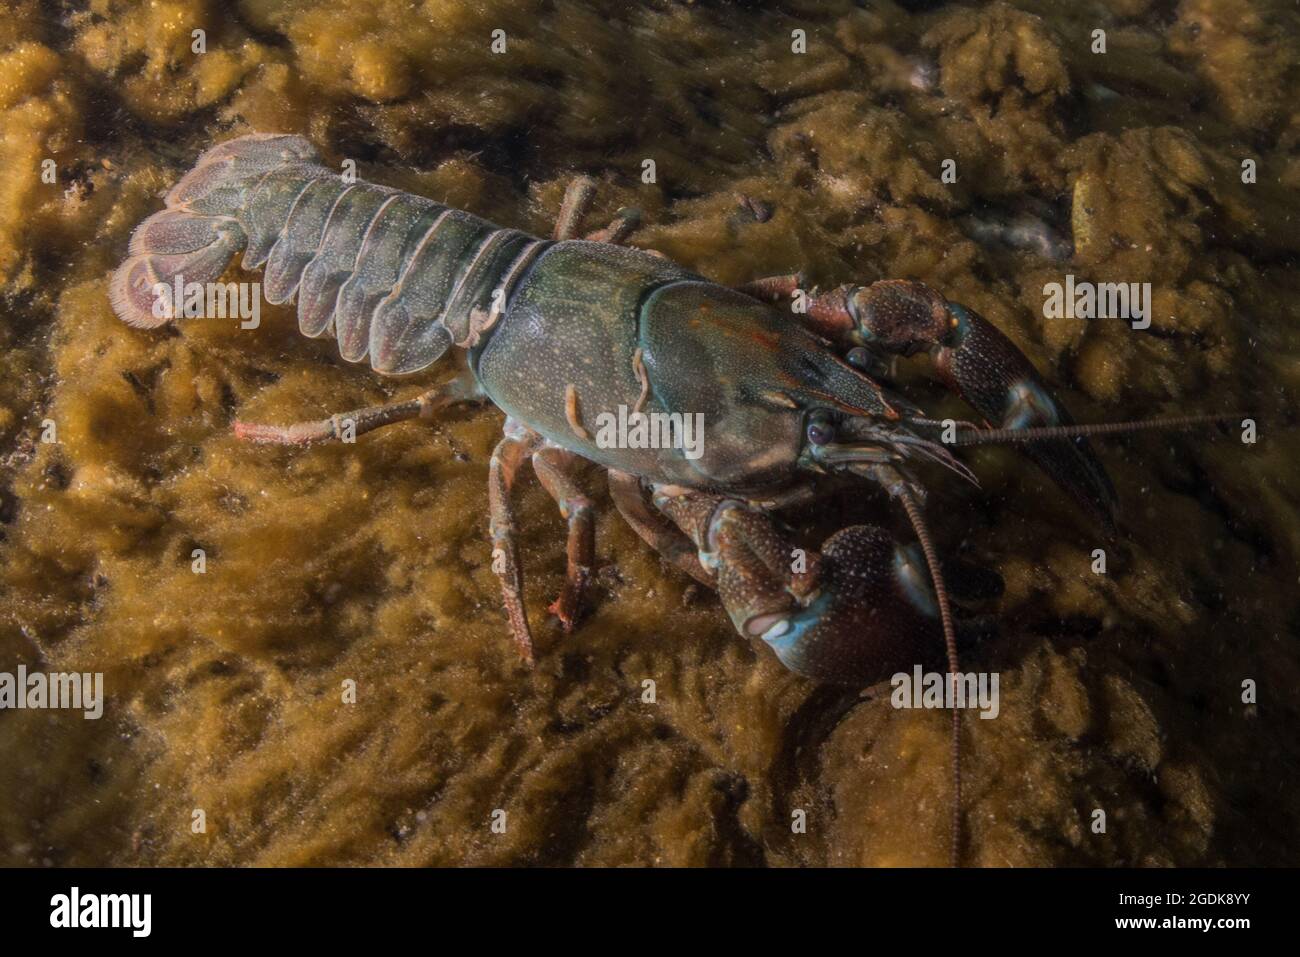 A signal crayfish (Pacifastacus leniusculus ) with parasitic branchiobdellids also known as crayfish worms stuck to its exoskeleton. Stock Photo